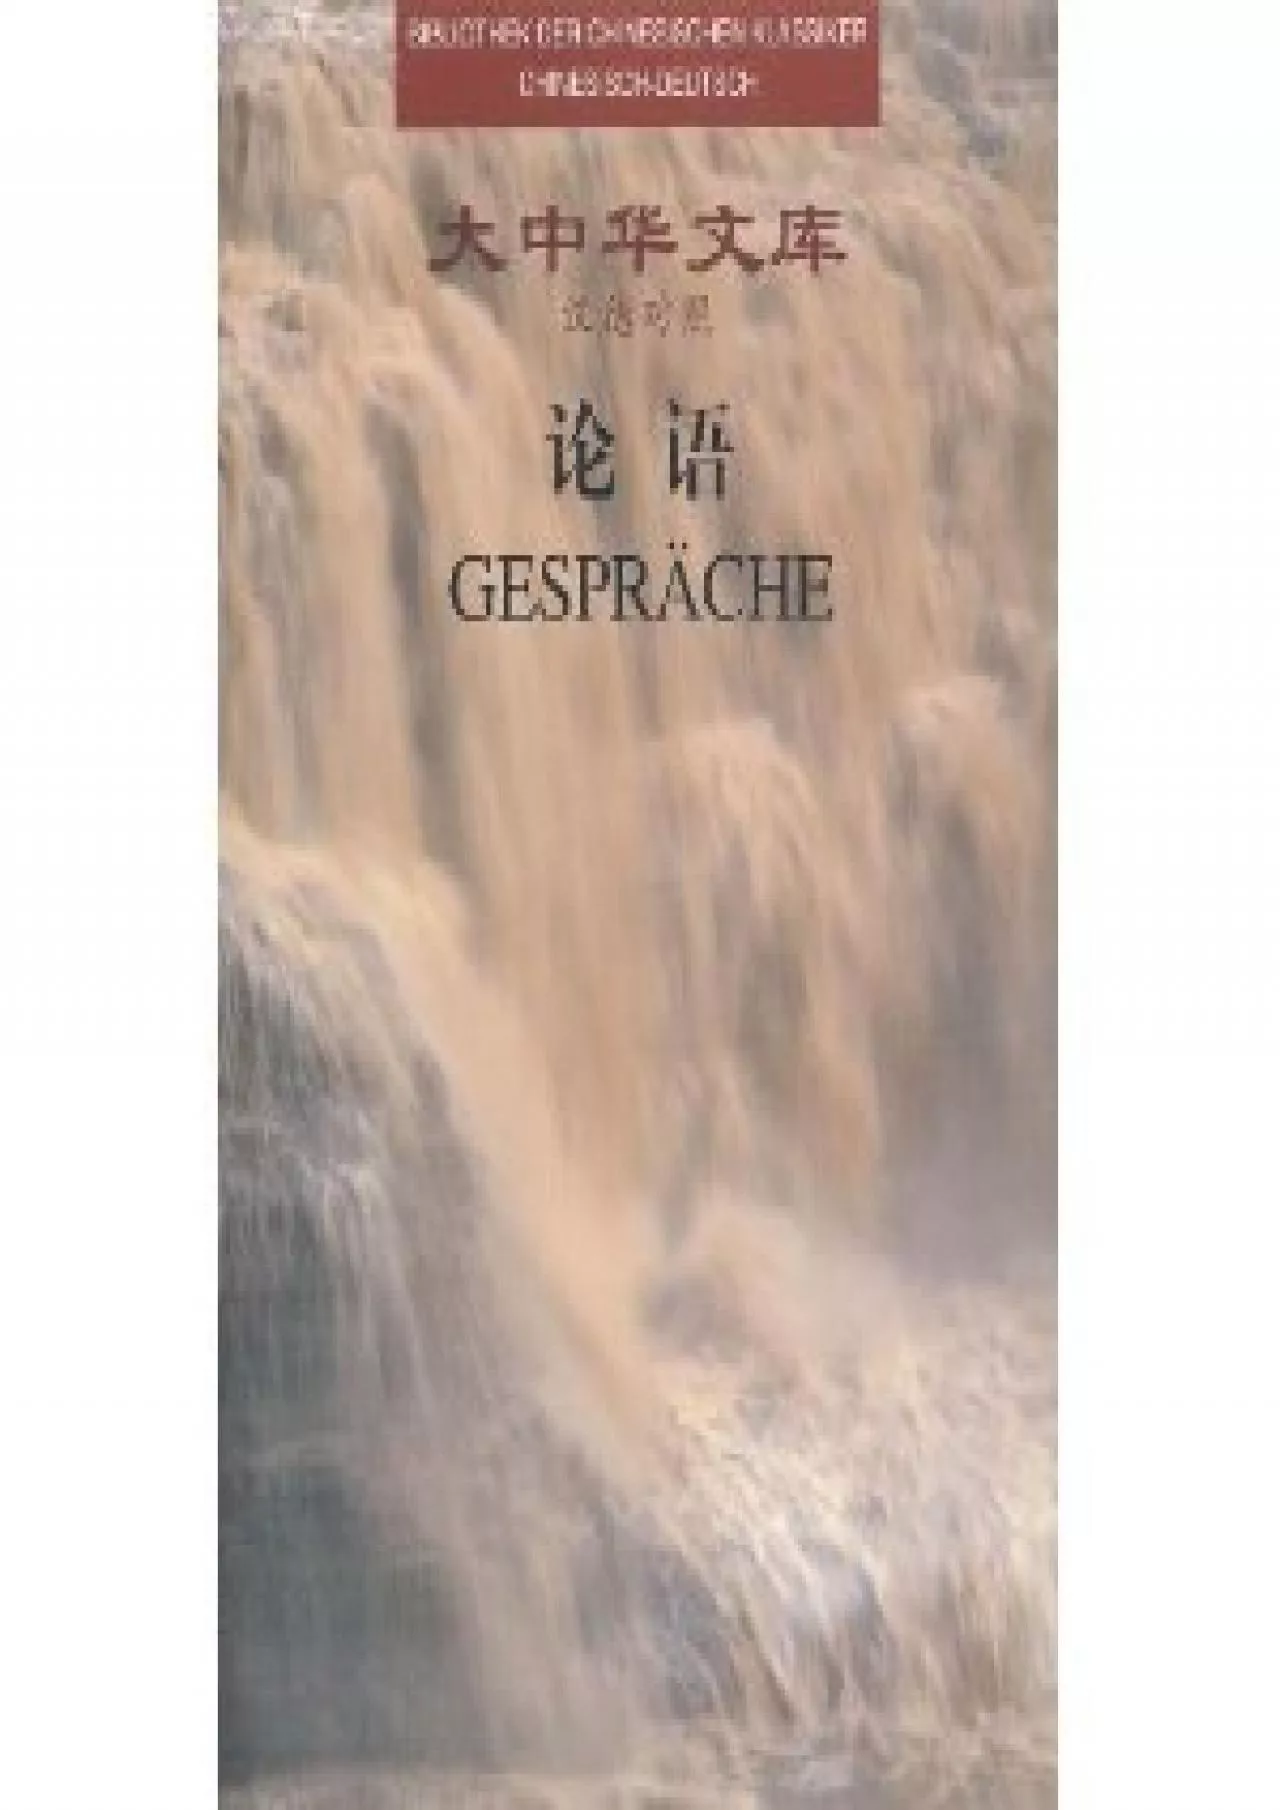 (EBOOK)-GESPRACHE (Analects of Confucius German-Chinese Edition) Library of Chinese Classics